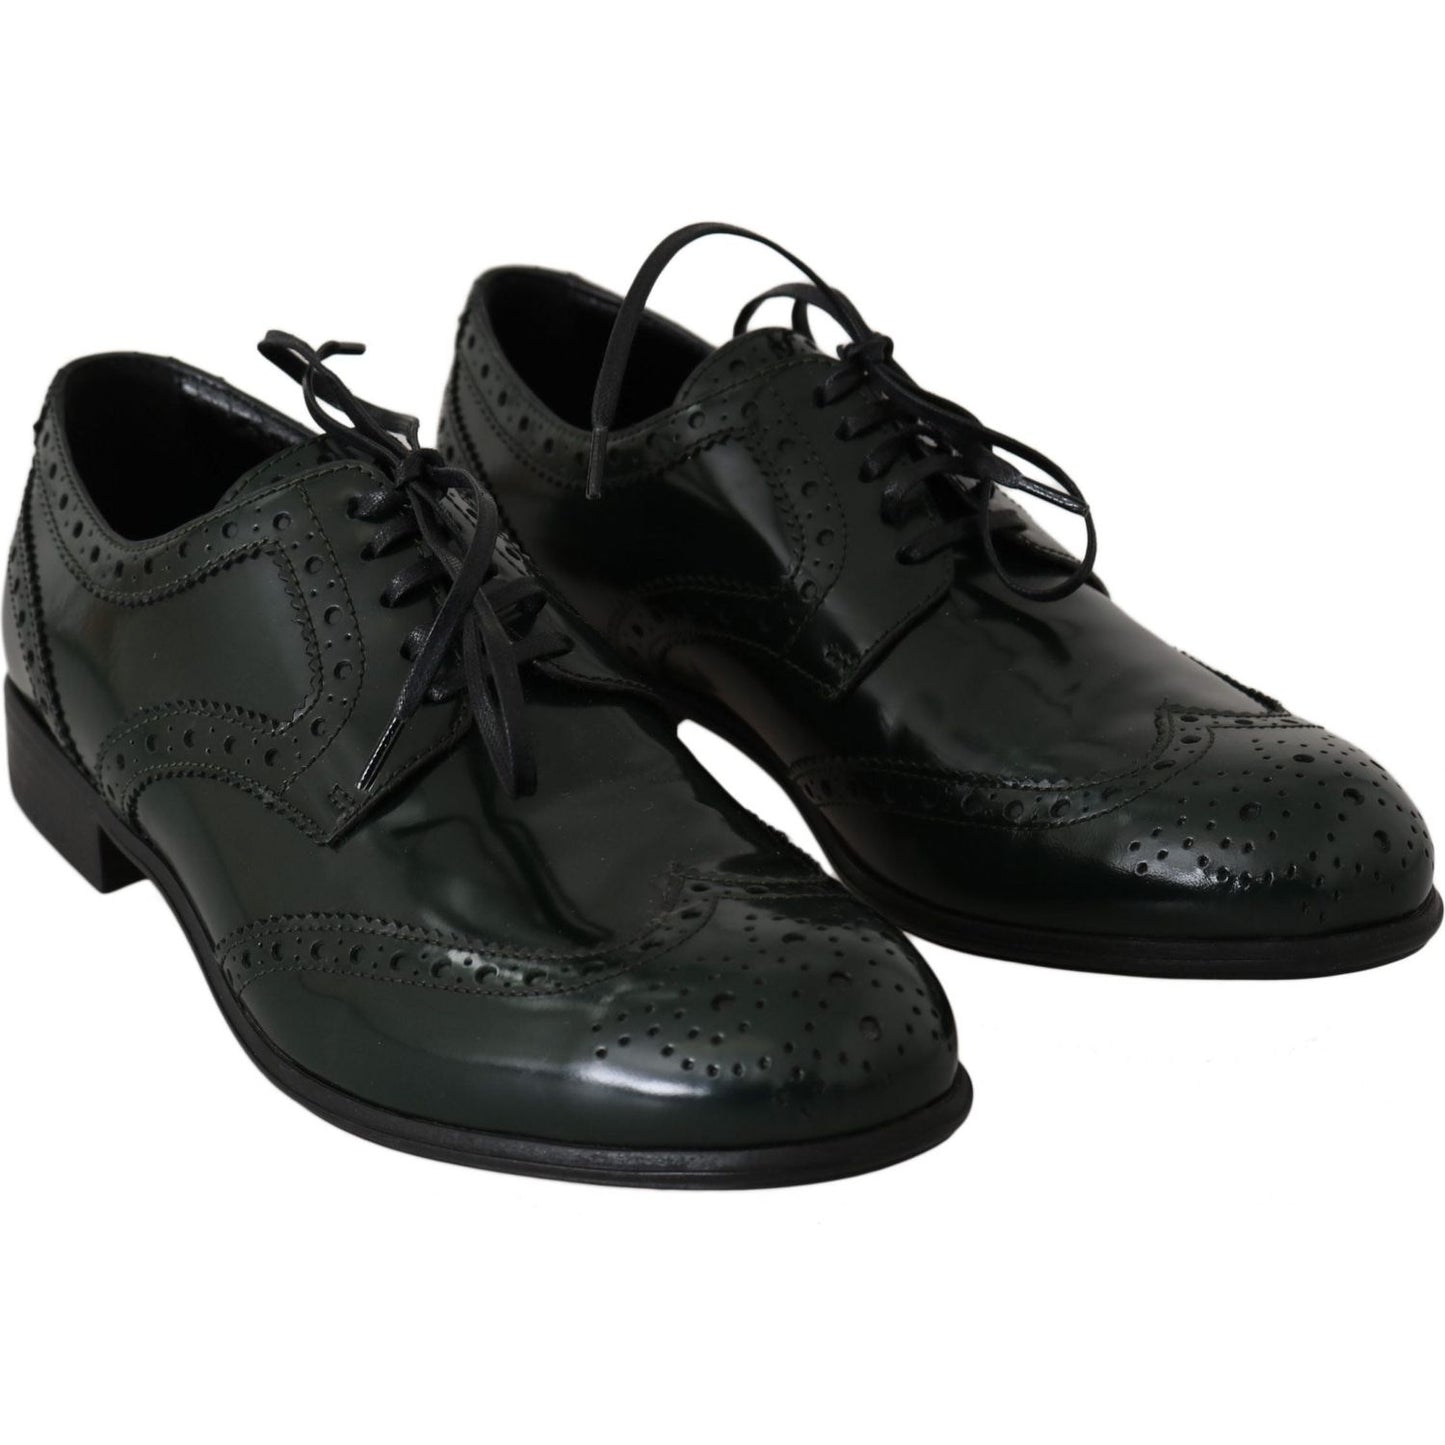 Dolce & Gabbana Elegant Green Brogues Oxford Wingtip Flats green-leather-broque-oxford-wingtip-shoes